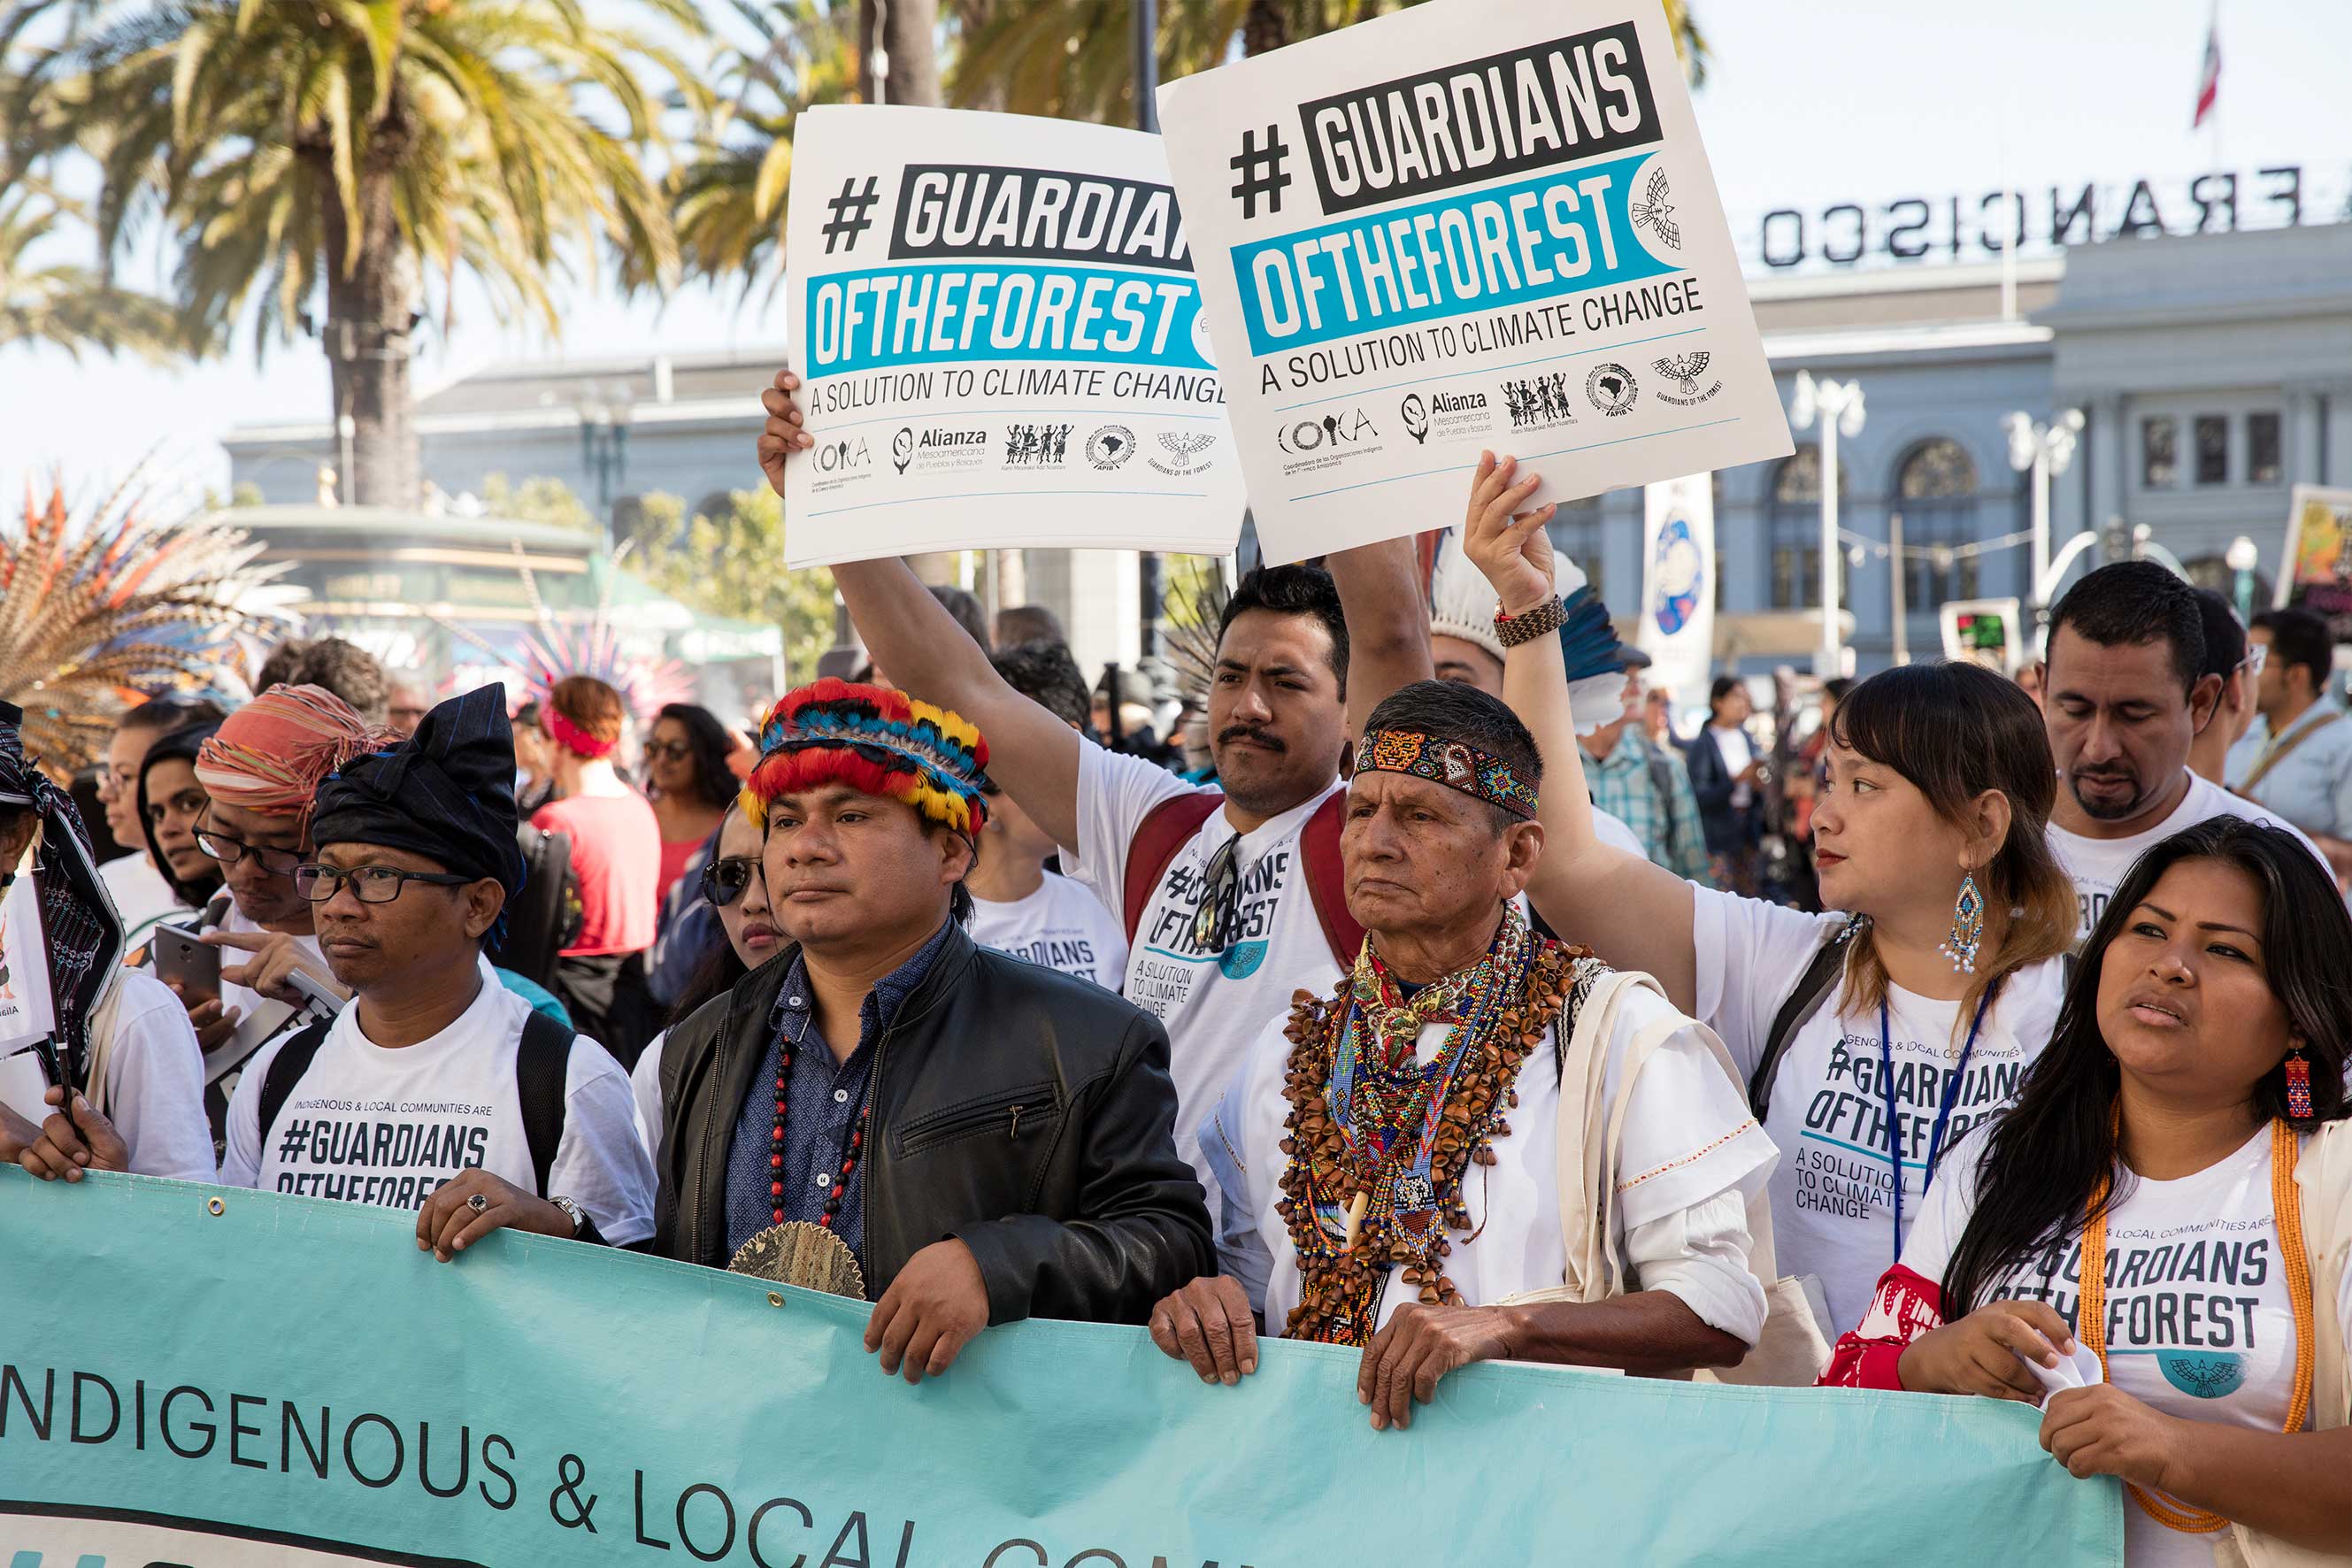 A group of indigenous leaders holds a large sign with the text Guardians of the forest during the 2018 Global Climate Action Summit  march in San Francisco. 